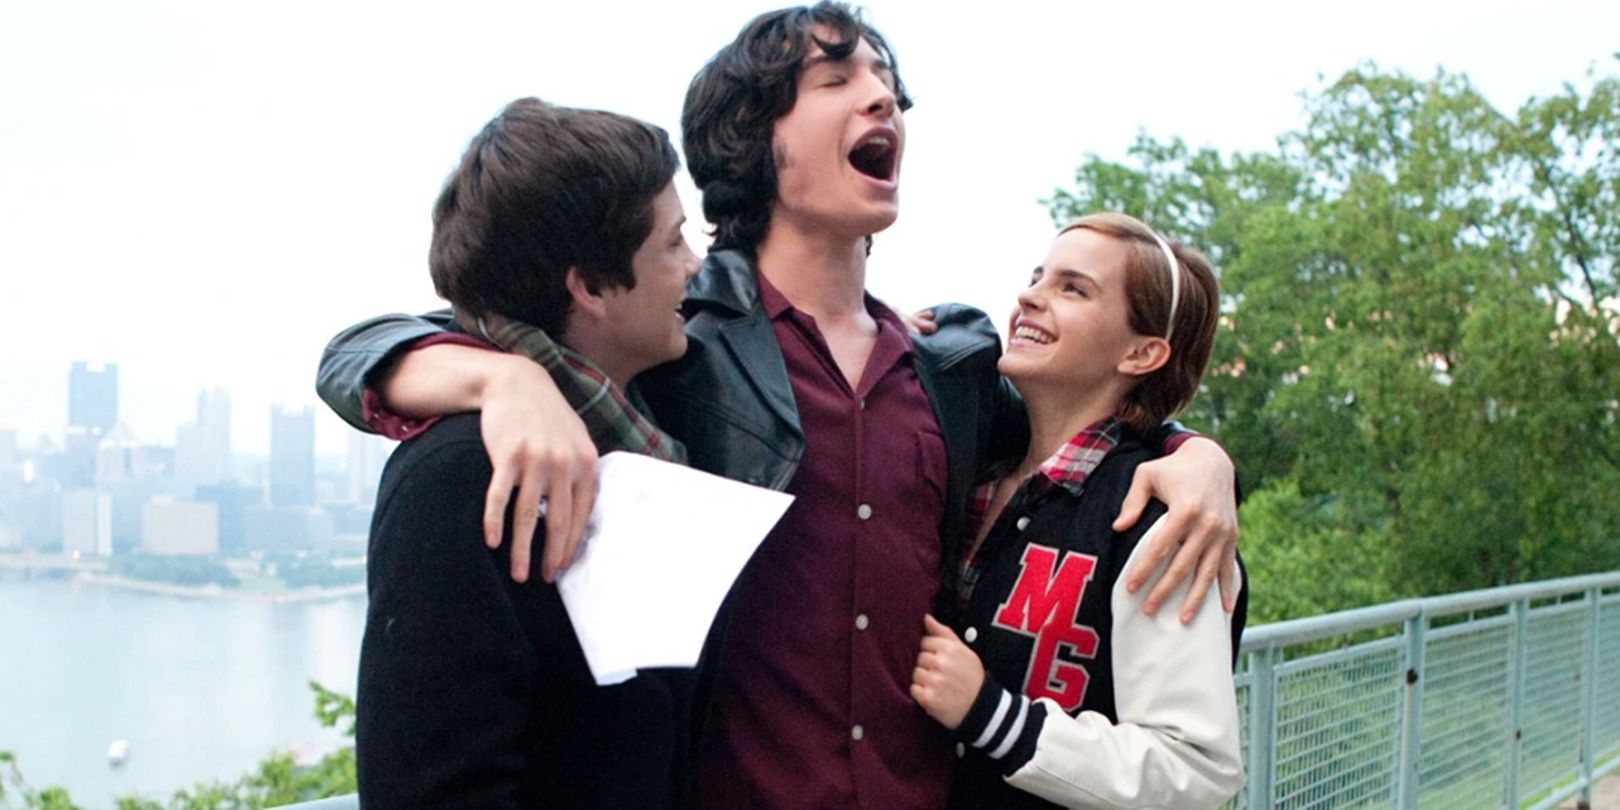 Three friends hug in The Perks Of Being A Wallflower